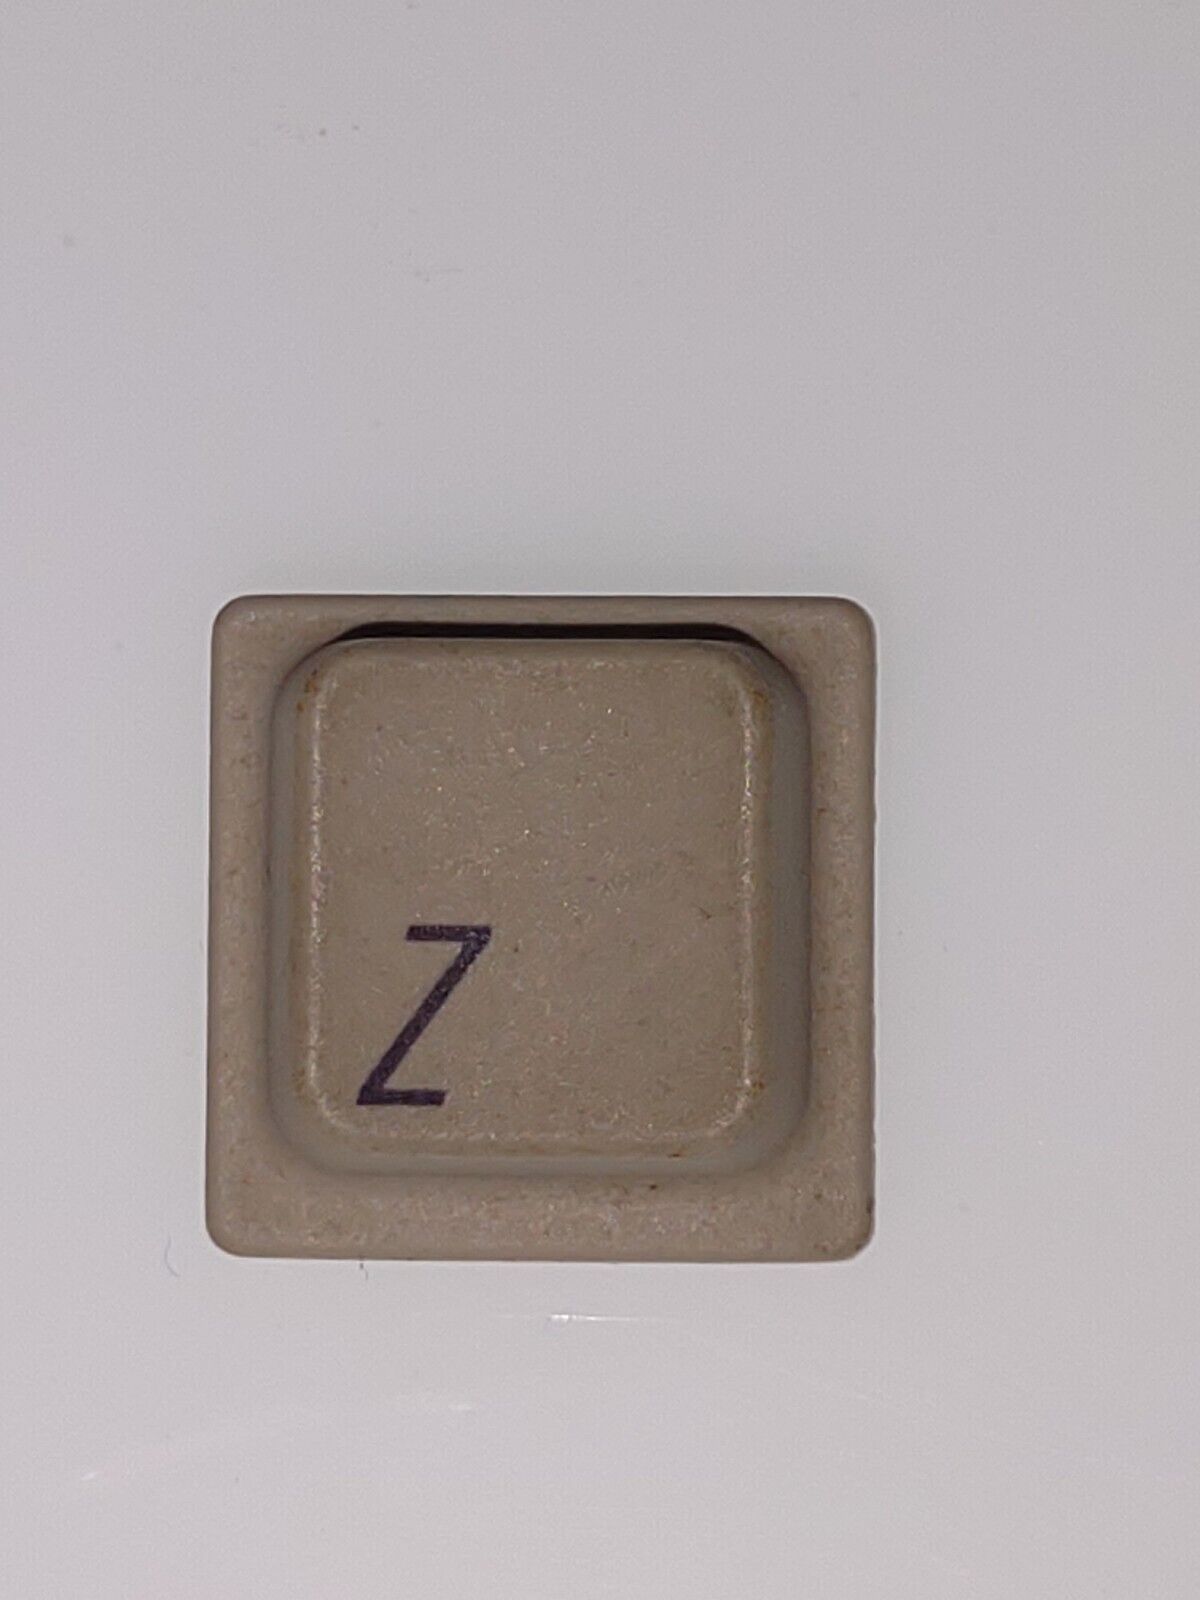 Apple IIC replacement KEY (Z) ORIGINAL VINTAGE REPLACEMENT KEY for ALPS SWITCHES